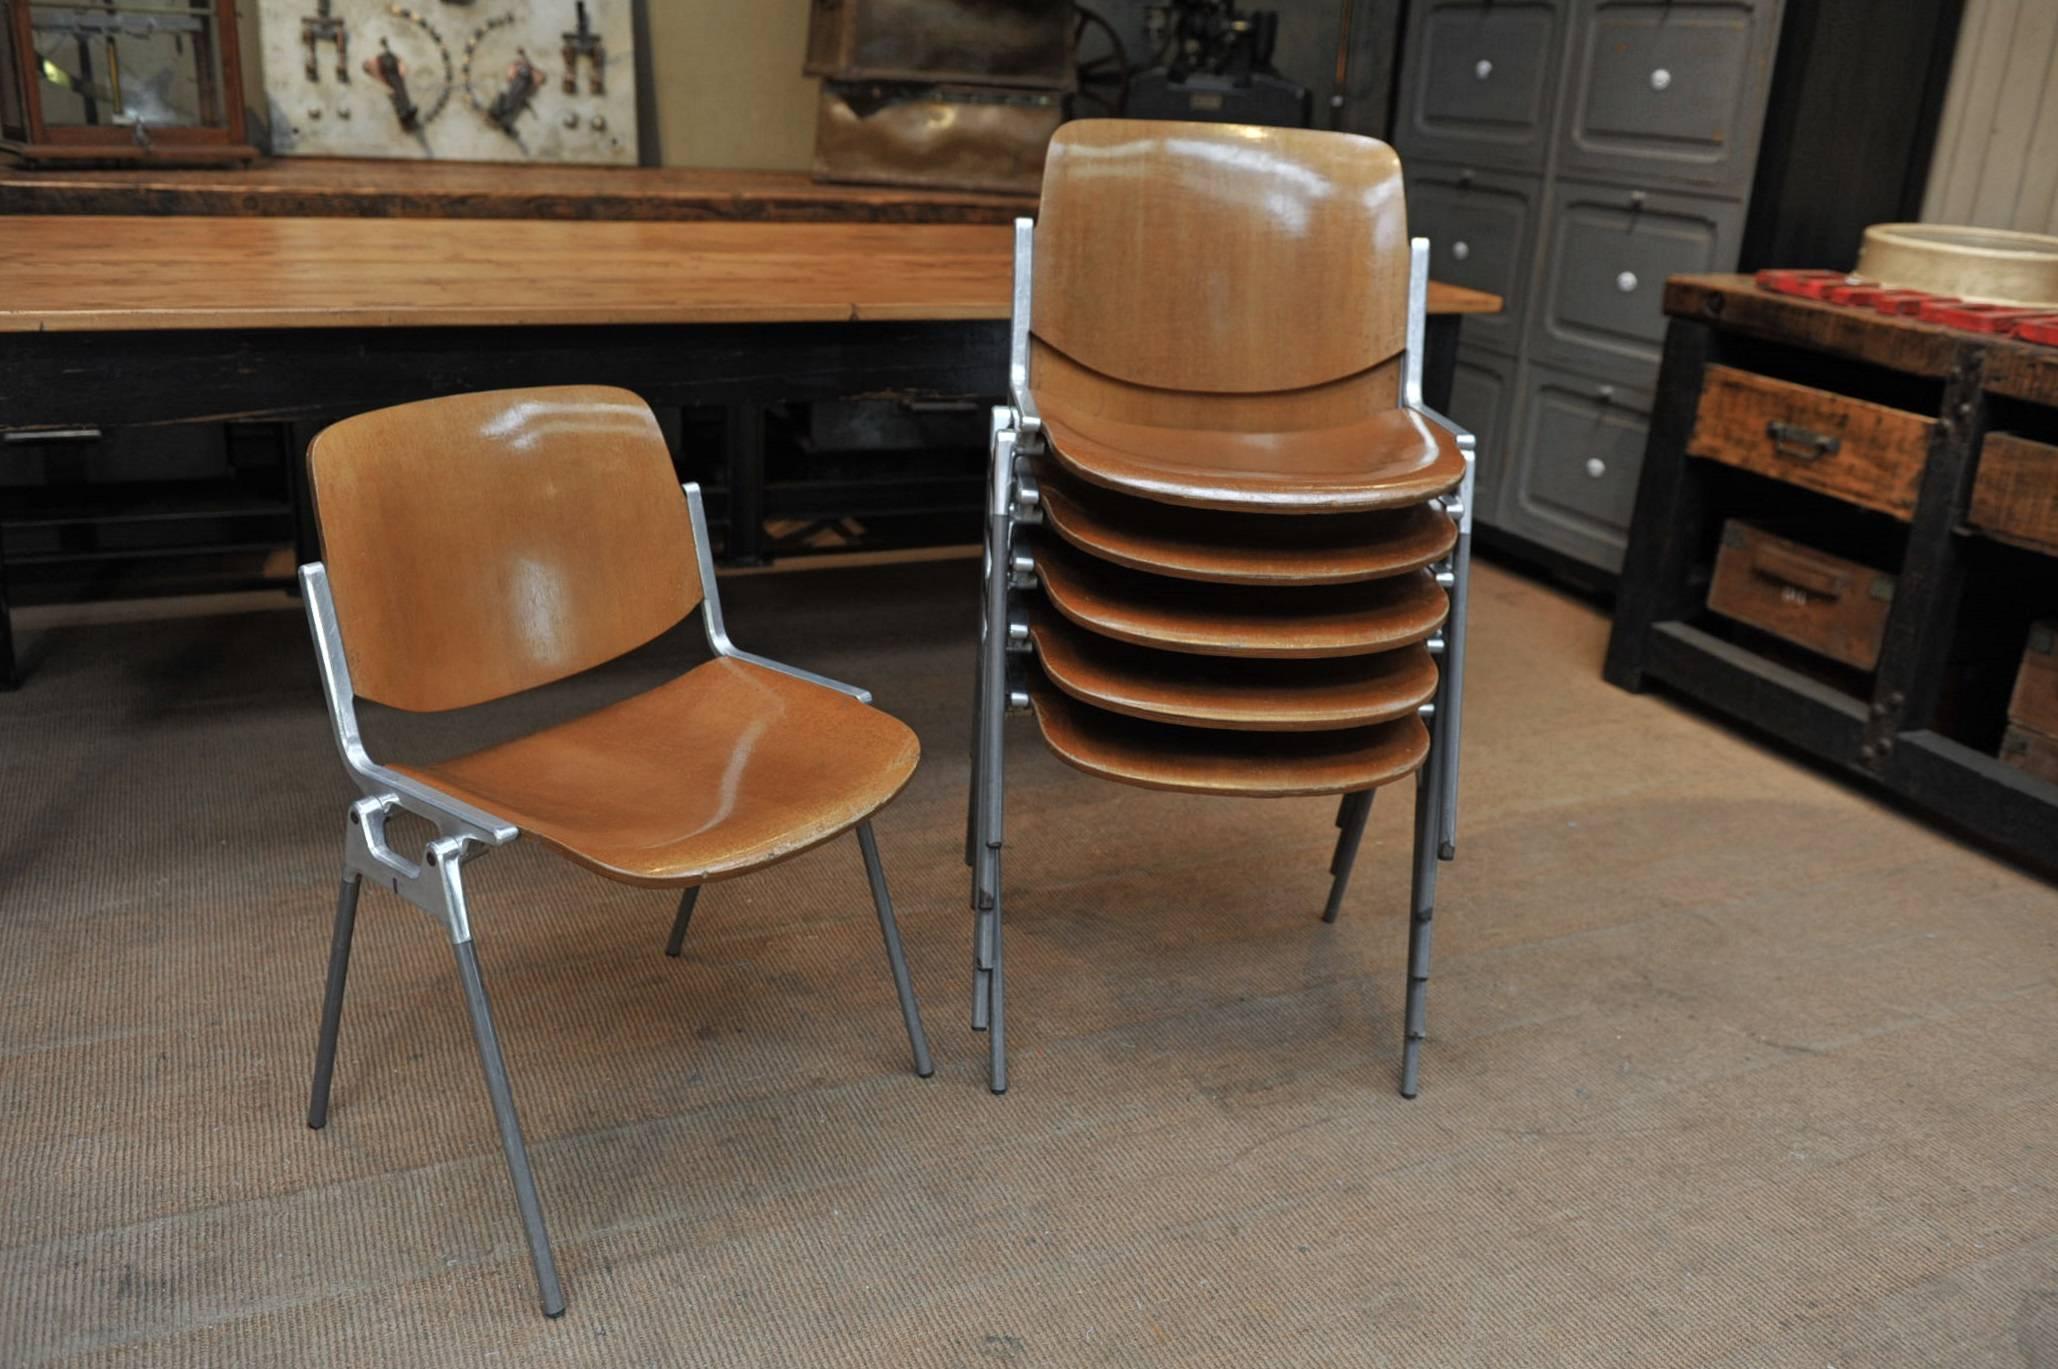 Set of Six Italian design chairs by Giancarlo Piretti for Castelli, plywood and aluminium, circa 1960 Made in Italy. Castelli carved twice on each chairs (see pictures). Price for set of six.
   